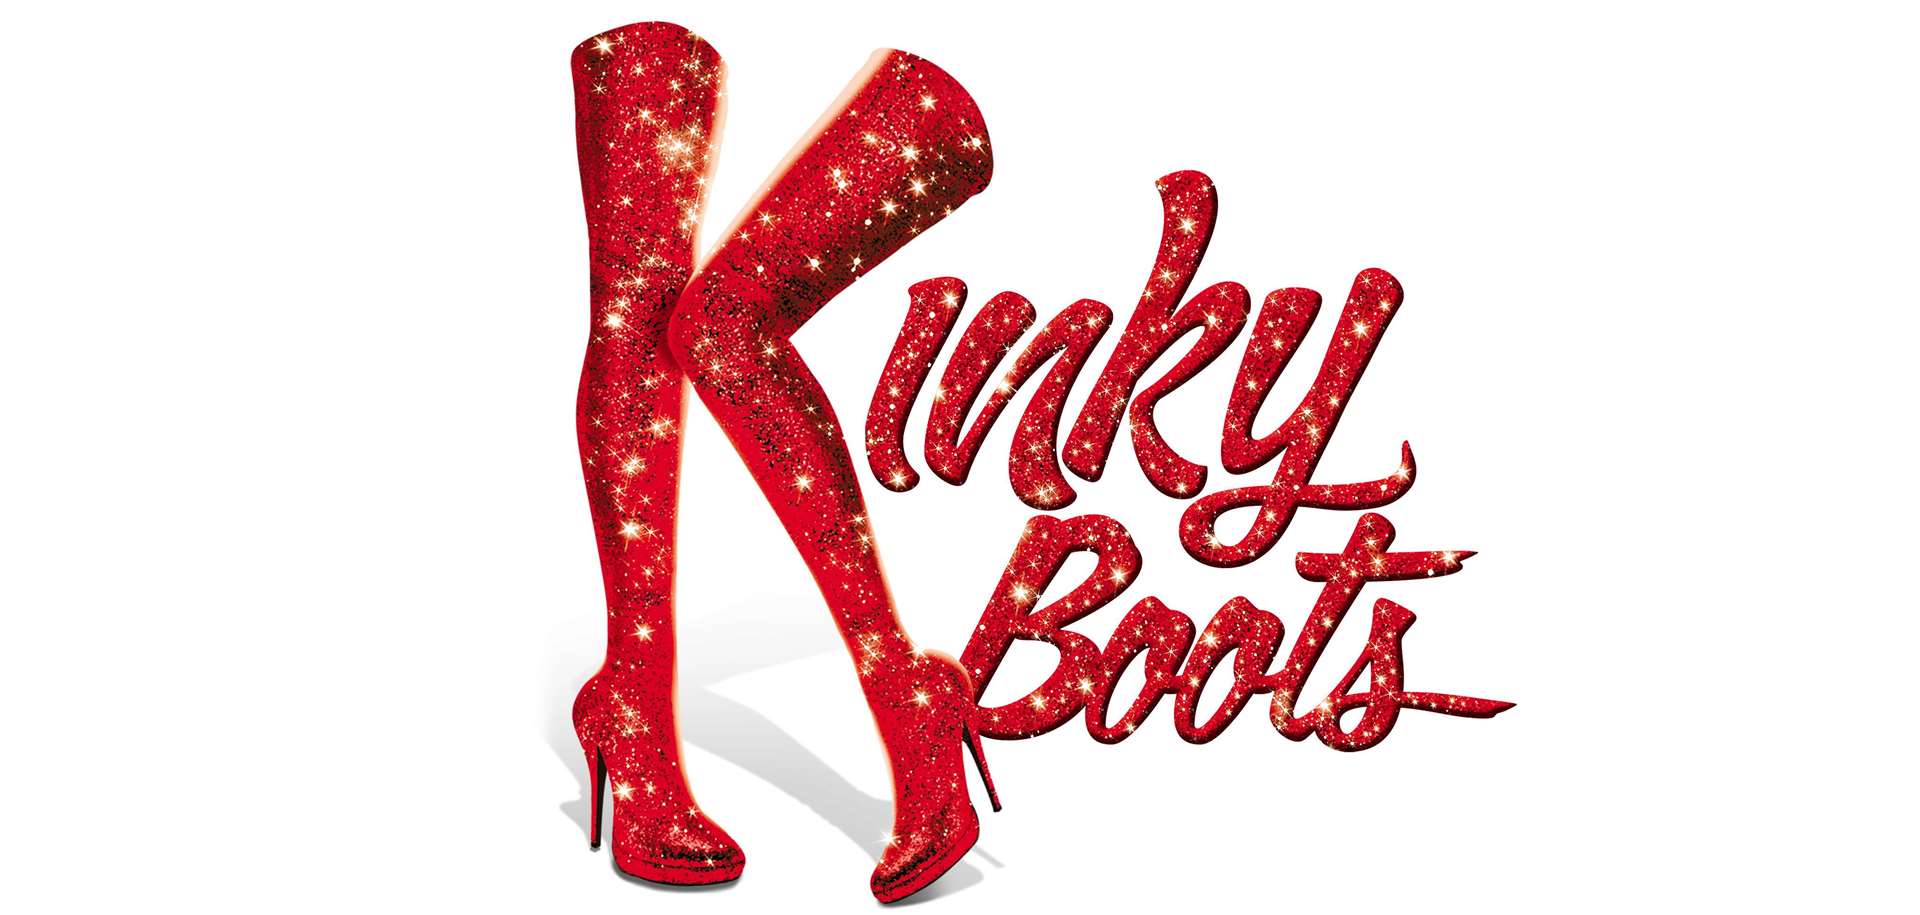 Kinky Boots the musical will open at the Marlowe Theatre